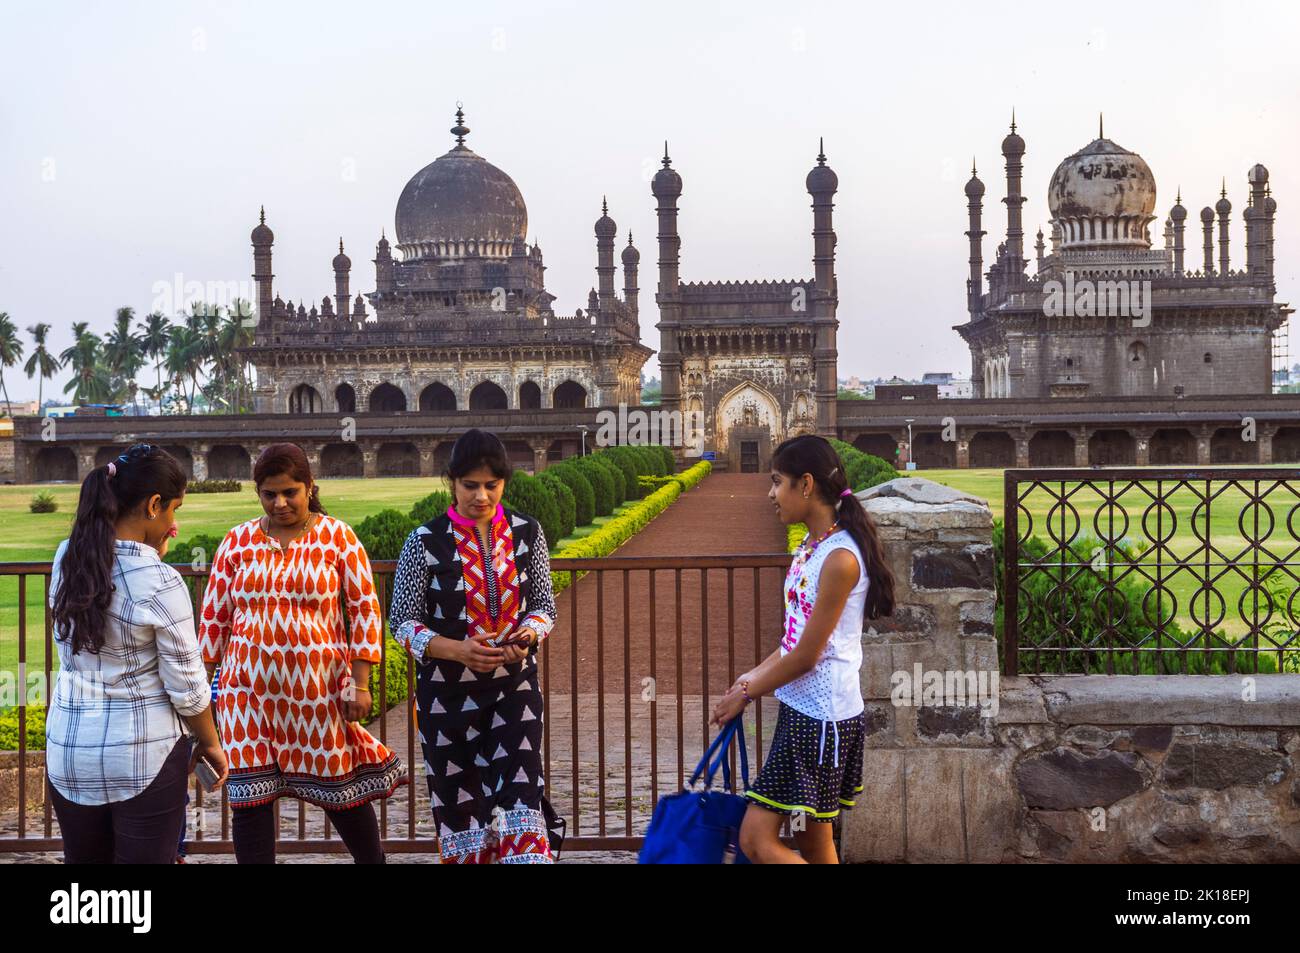 Bijapur, Karnataka, India : A group of young women stand next to the 17th century Ibrahim Rouza mausoleum and mosque considered as one of the most bea Stock Photo